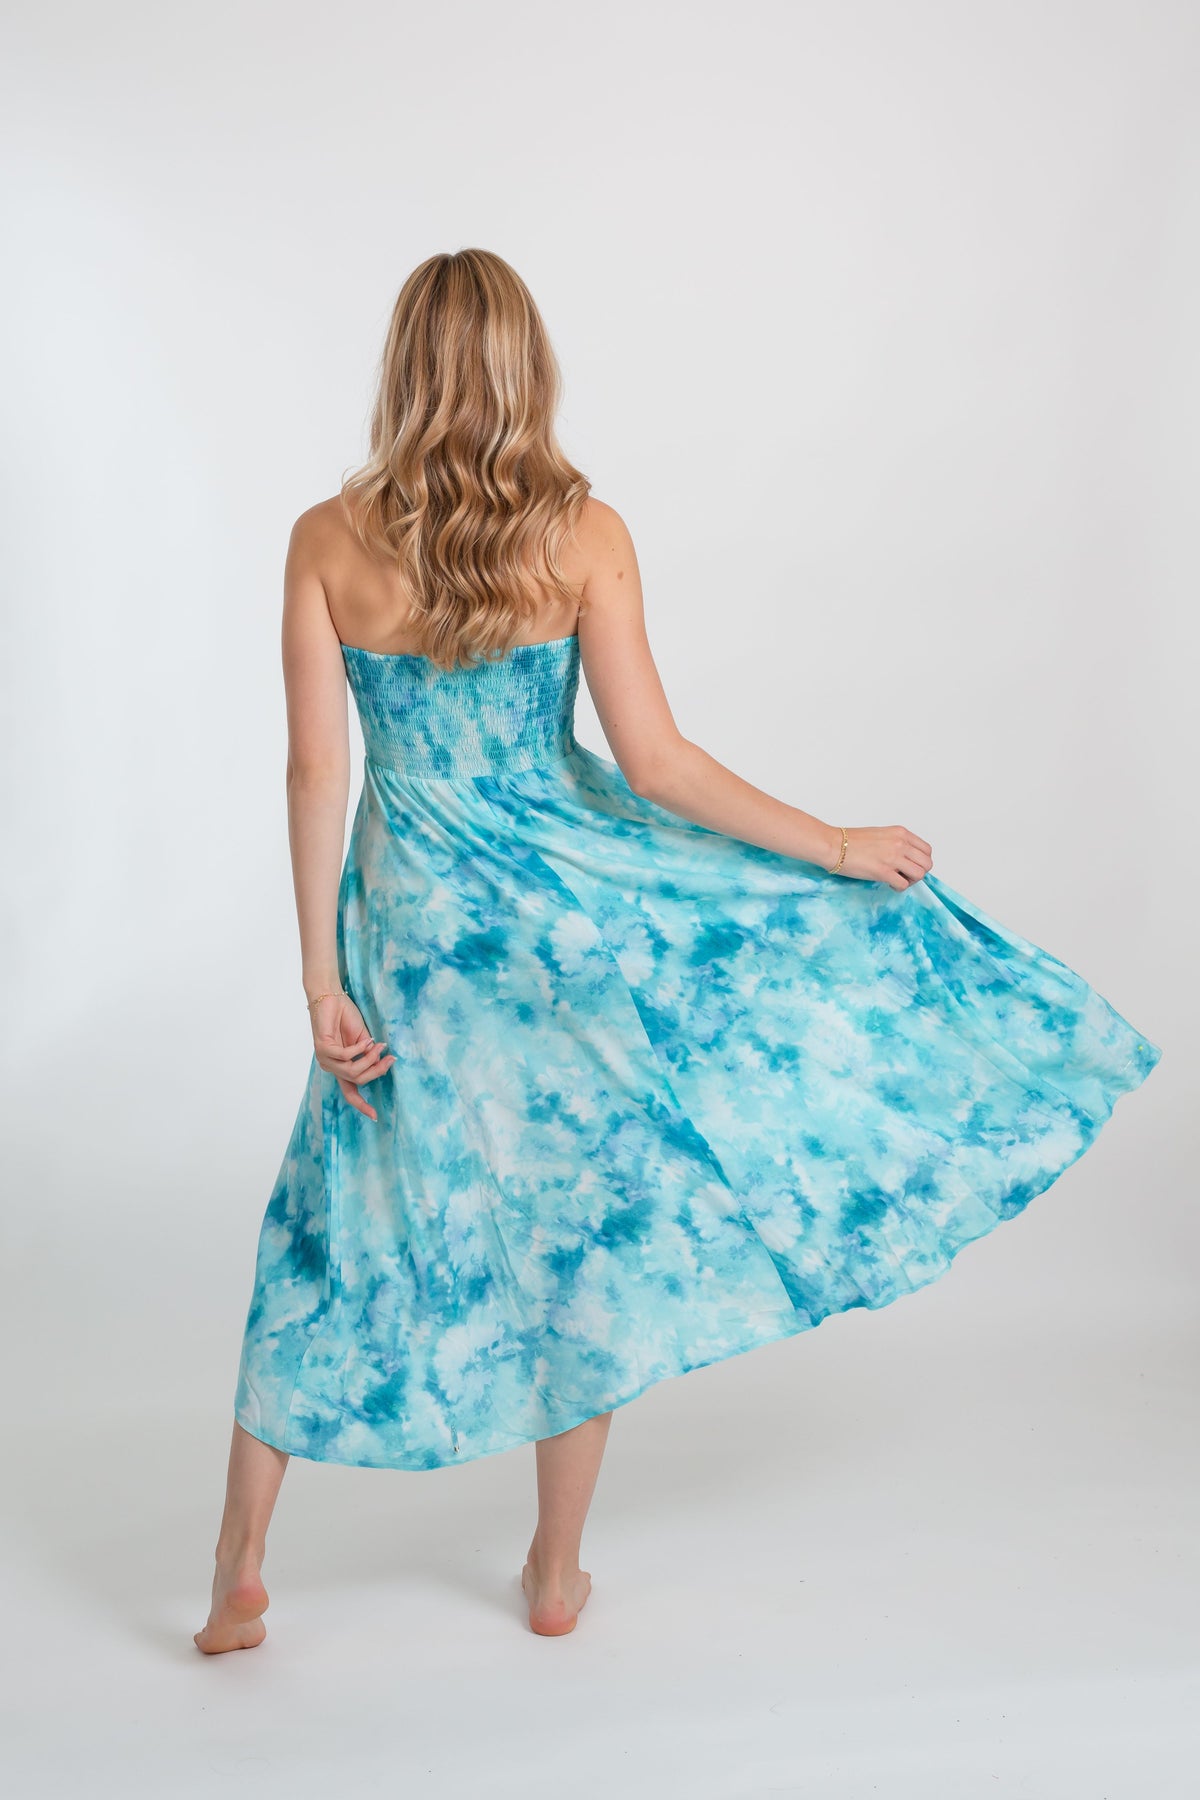 A woman wearing Koy Resort Aquarelle collection blue tie-dye dress one hand holding the edge of the dress, lifting it slightly. The dress is a vibrant shade of blue, with a unique tie-dye pattern that creates a marbled effect. The dress is sleeveless and appears to have a flowy, relaxed fit. 